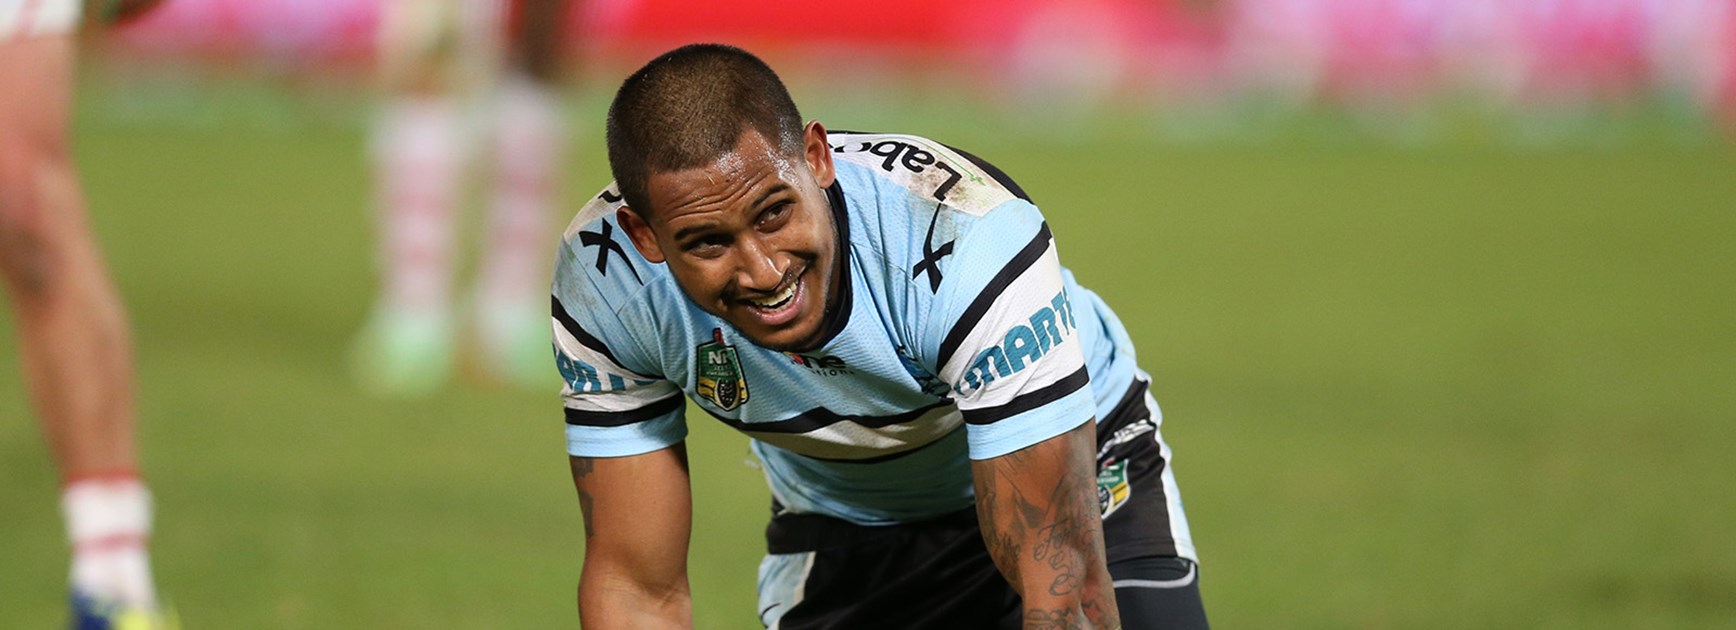 Ben Barba has a laugh after his risky pass led to a drop-out.